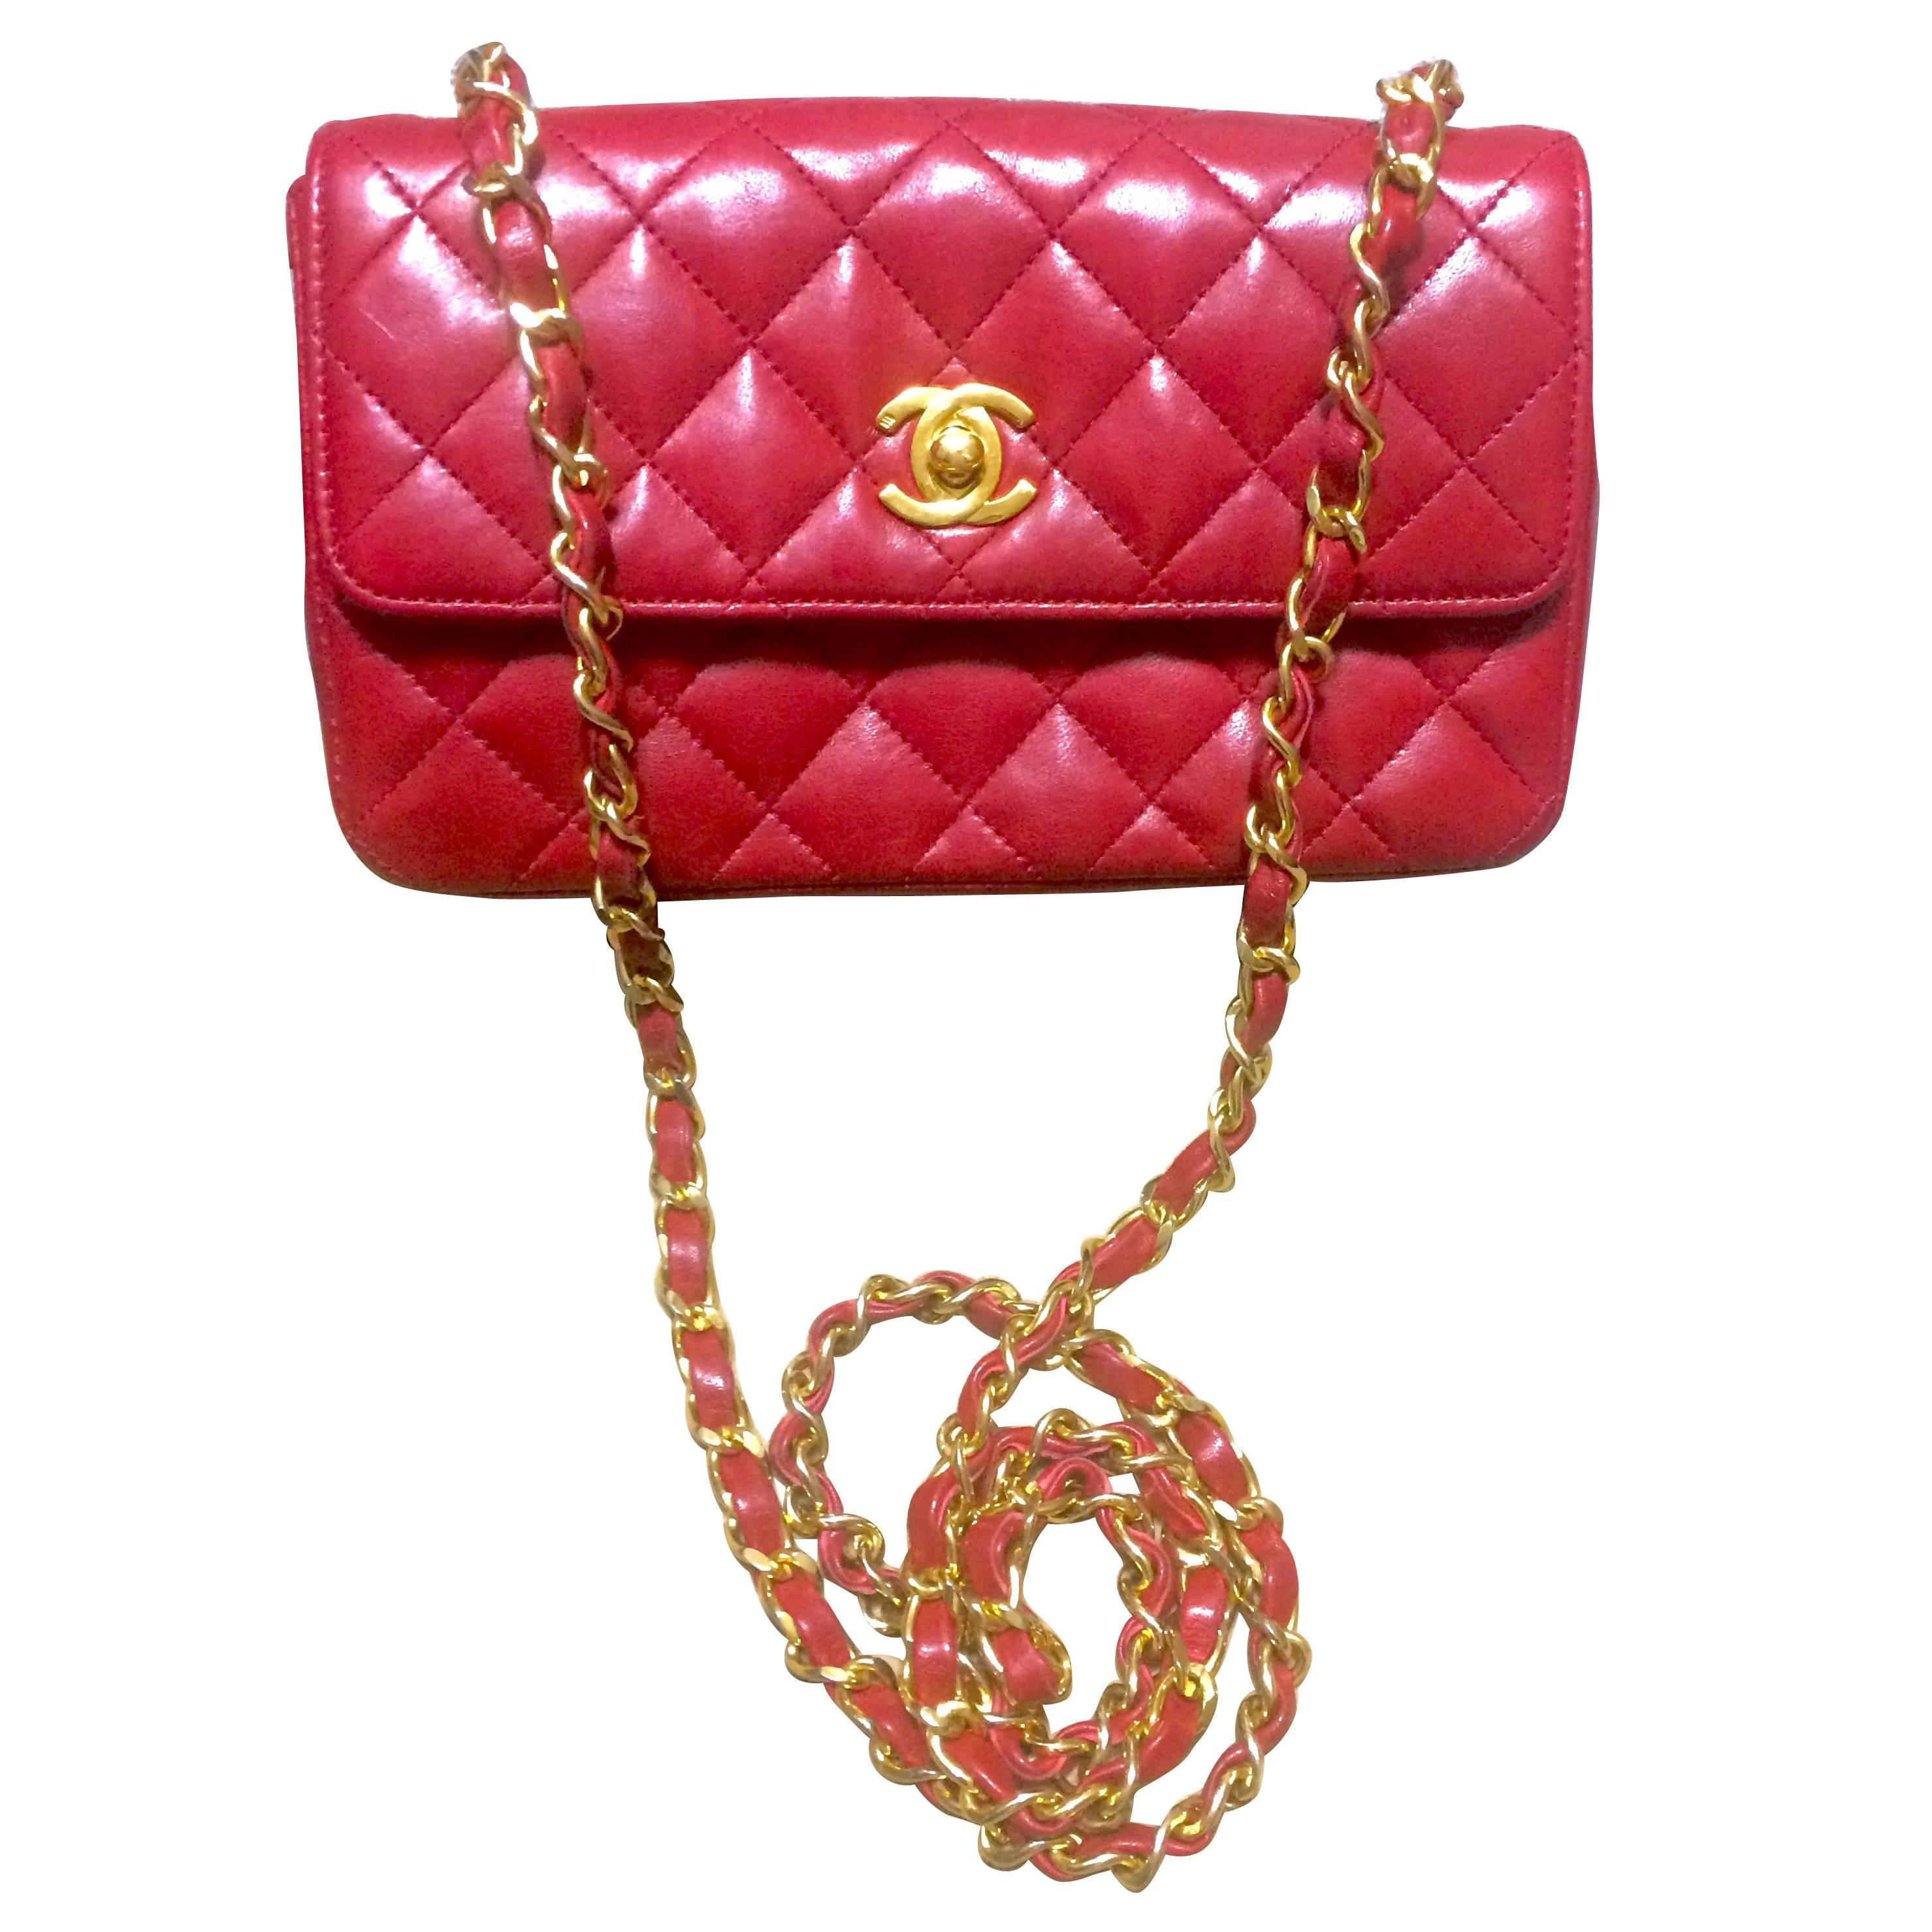 Vintage CHANEL classic mini flap 2.55 shoulder bag in lipstick red lambskin. For Sale